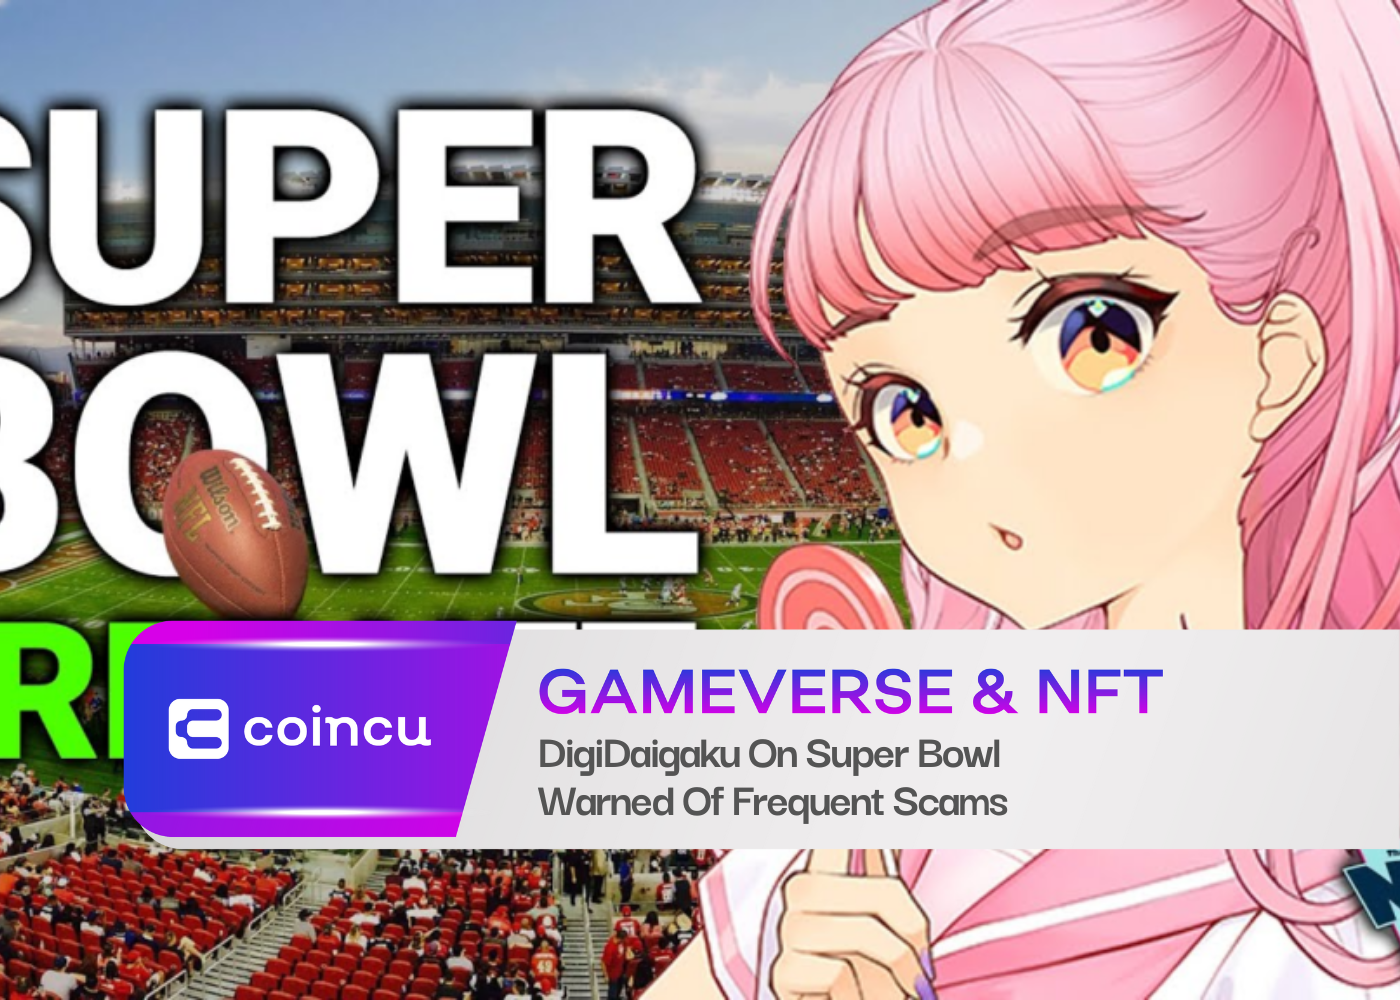 DigiDaigaku On Super Bowl Warned Of Frequent Scams